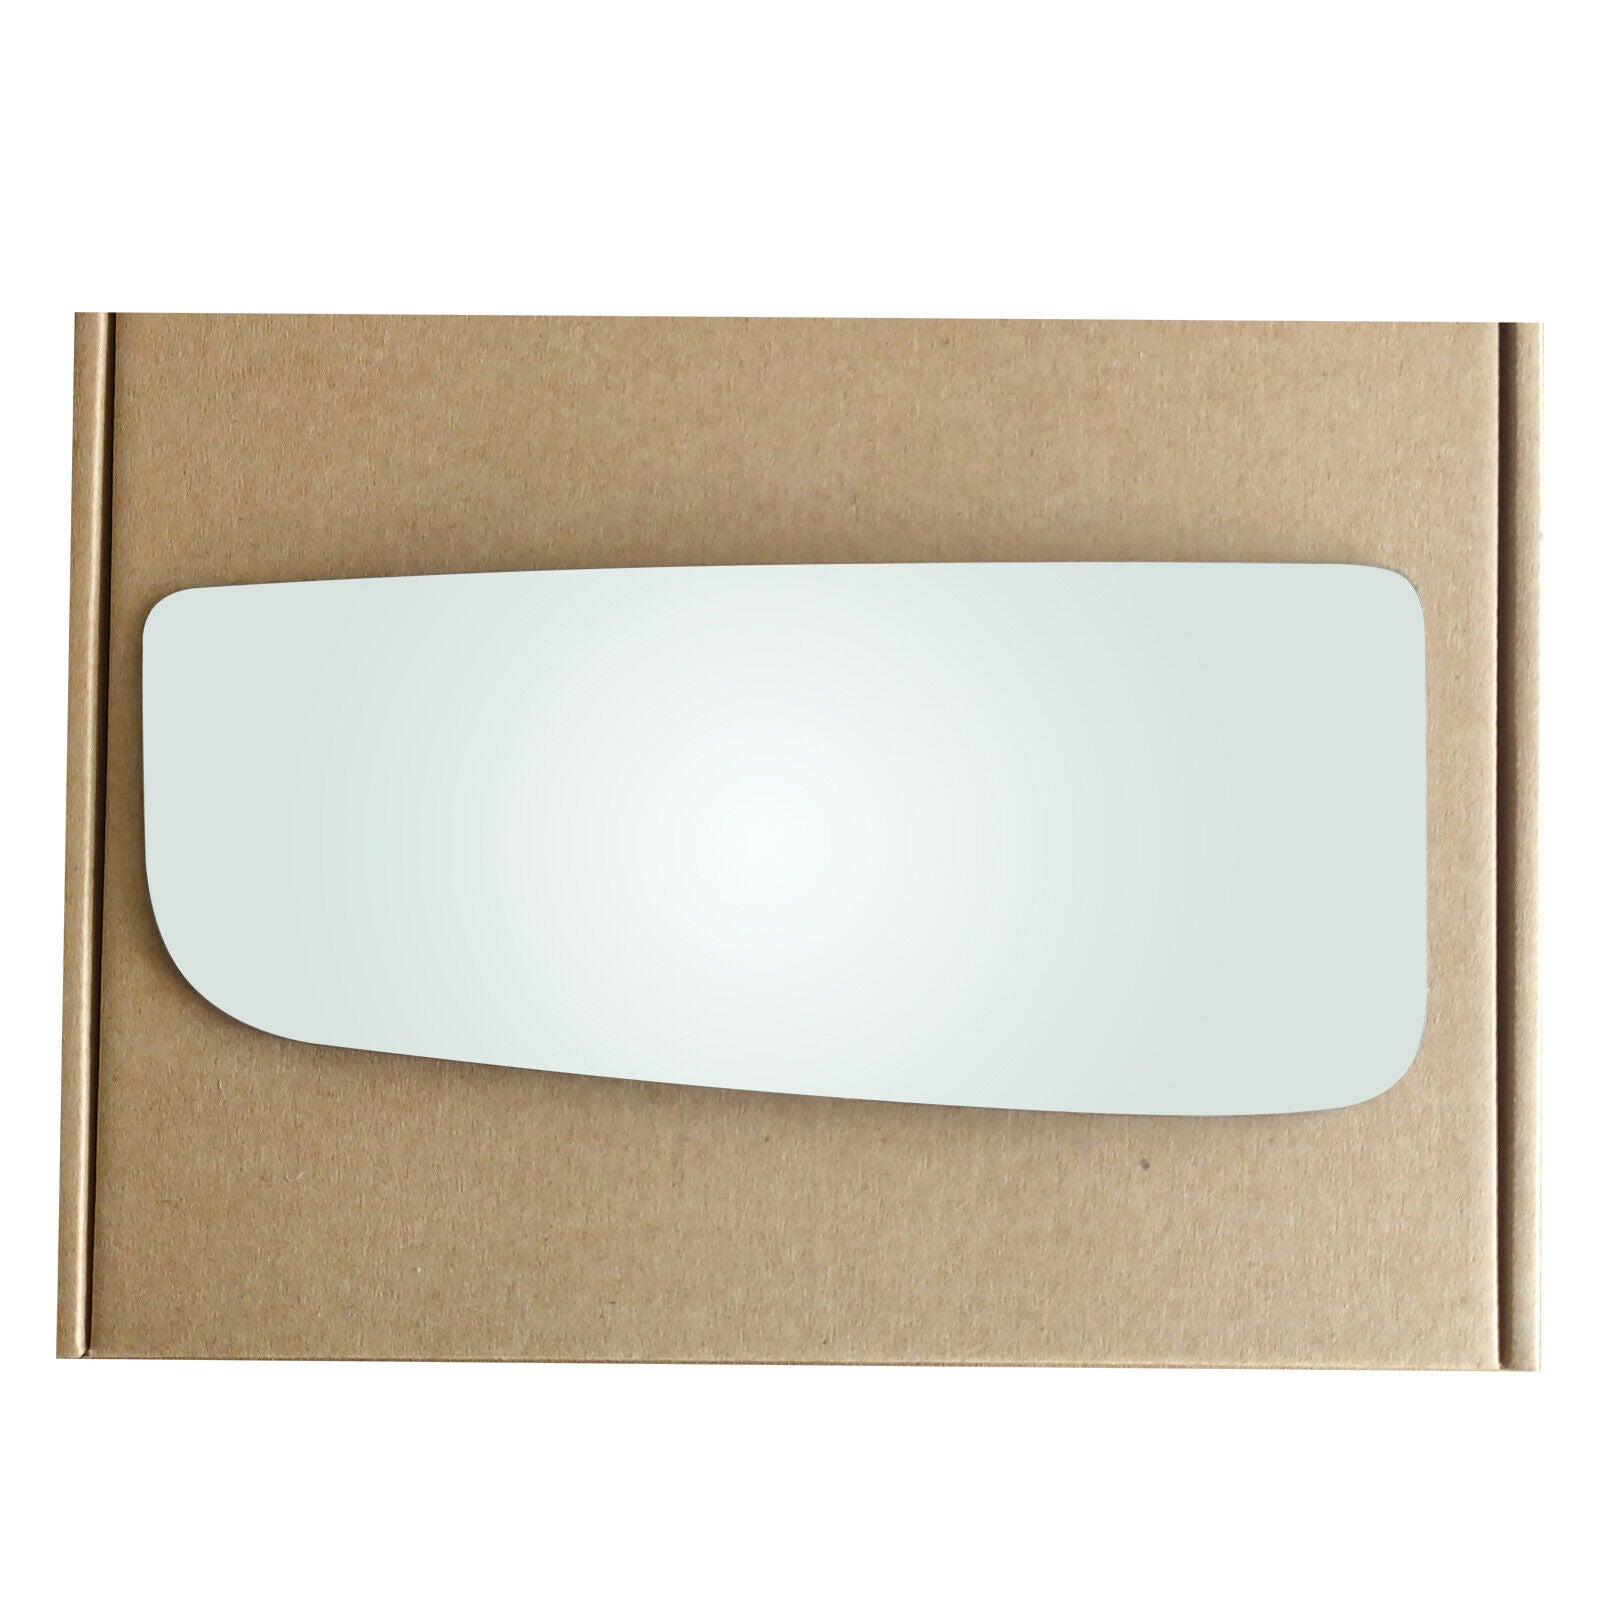 WLLW Lower Replace Towing Mirror Glass for 2015-2019 Ford F150/2017-2019 Ford F205 F350 F450 F550 Super Duty, Driver Left Side LH/Passenger Right Side RH/The Both Sides Convex M-0048